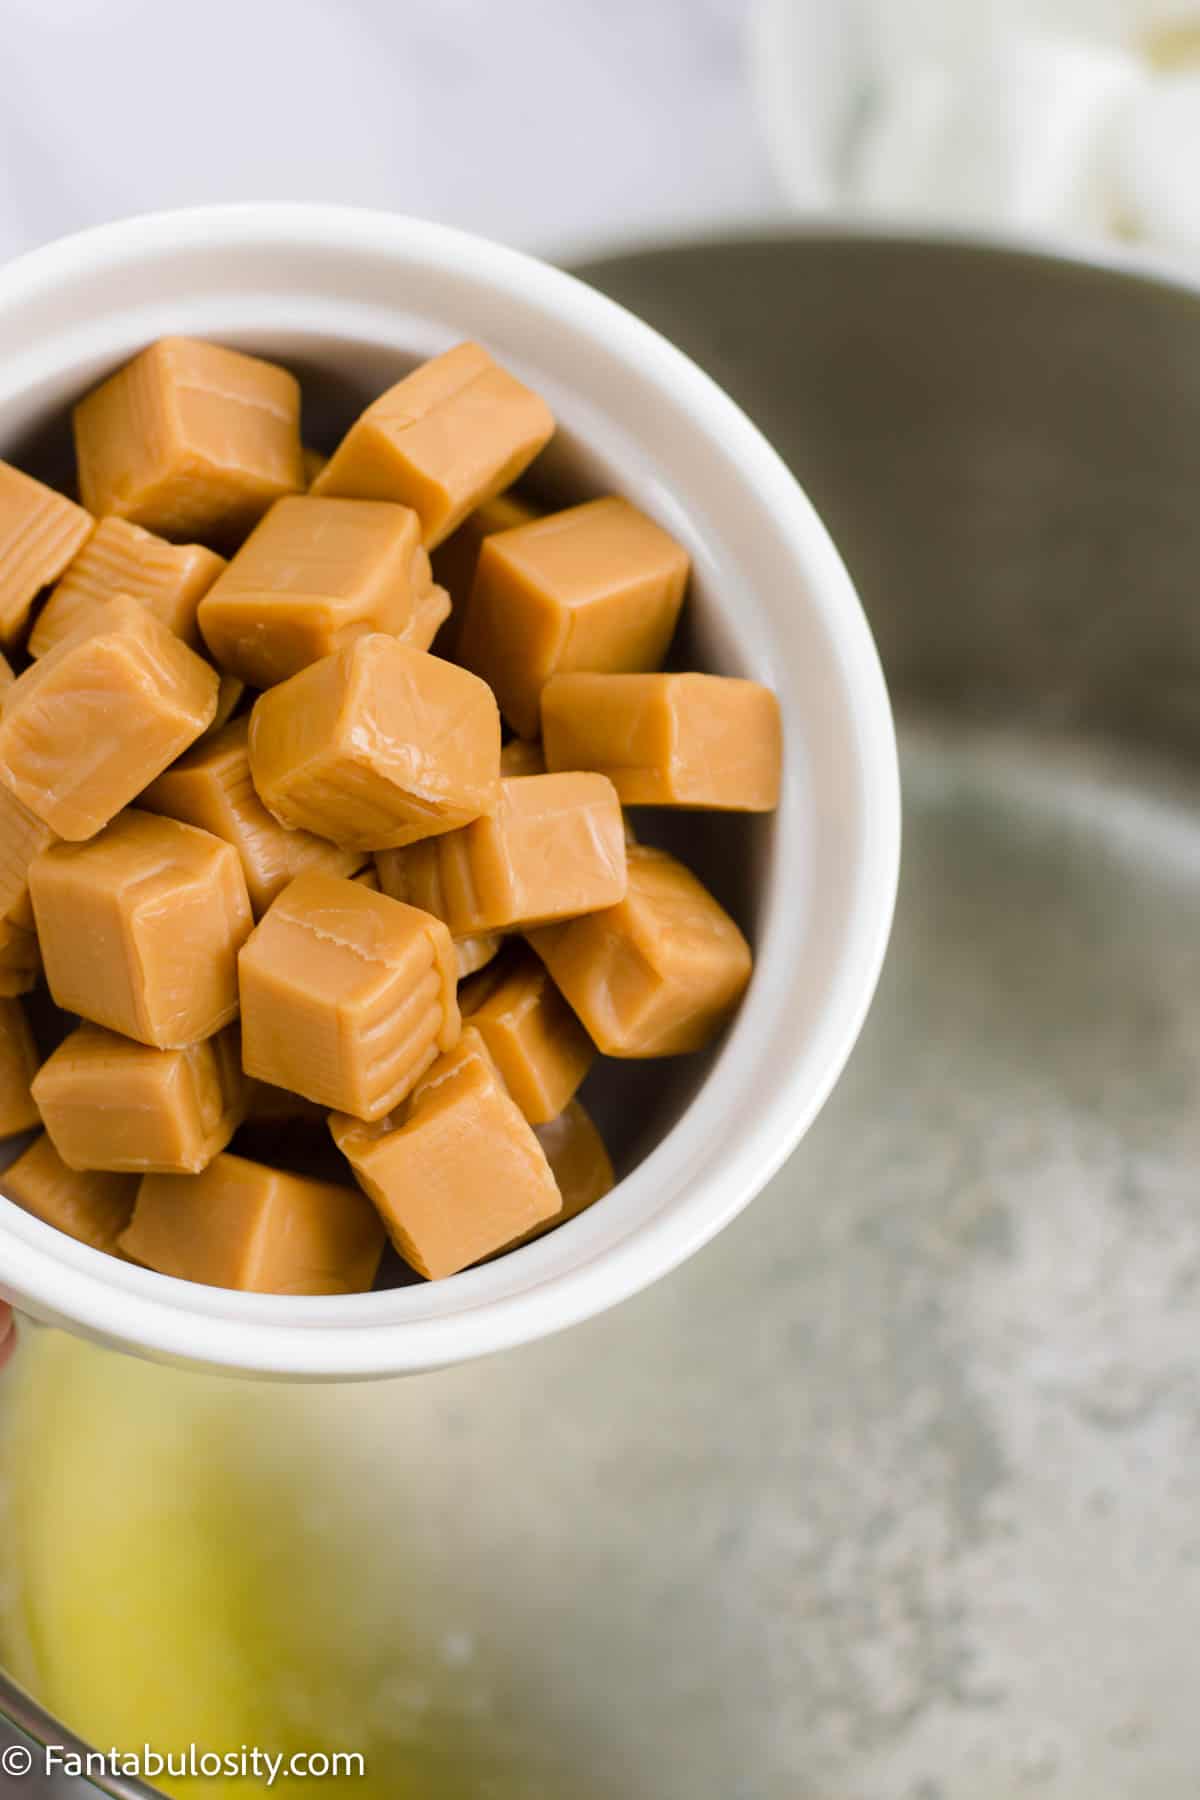 Add caramels to butter.